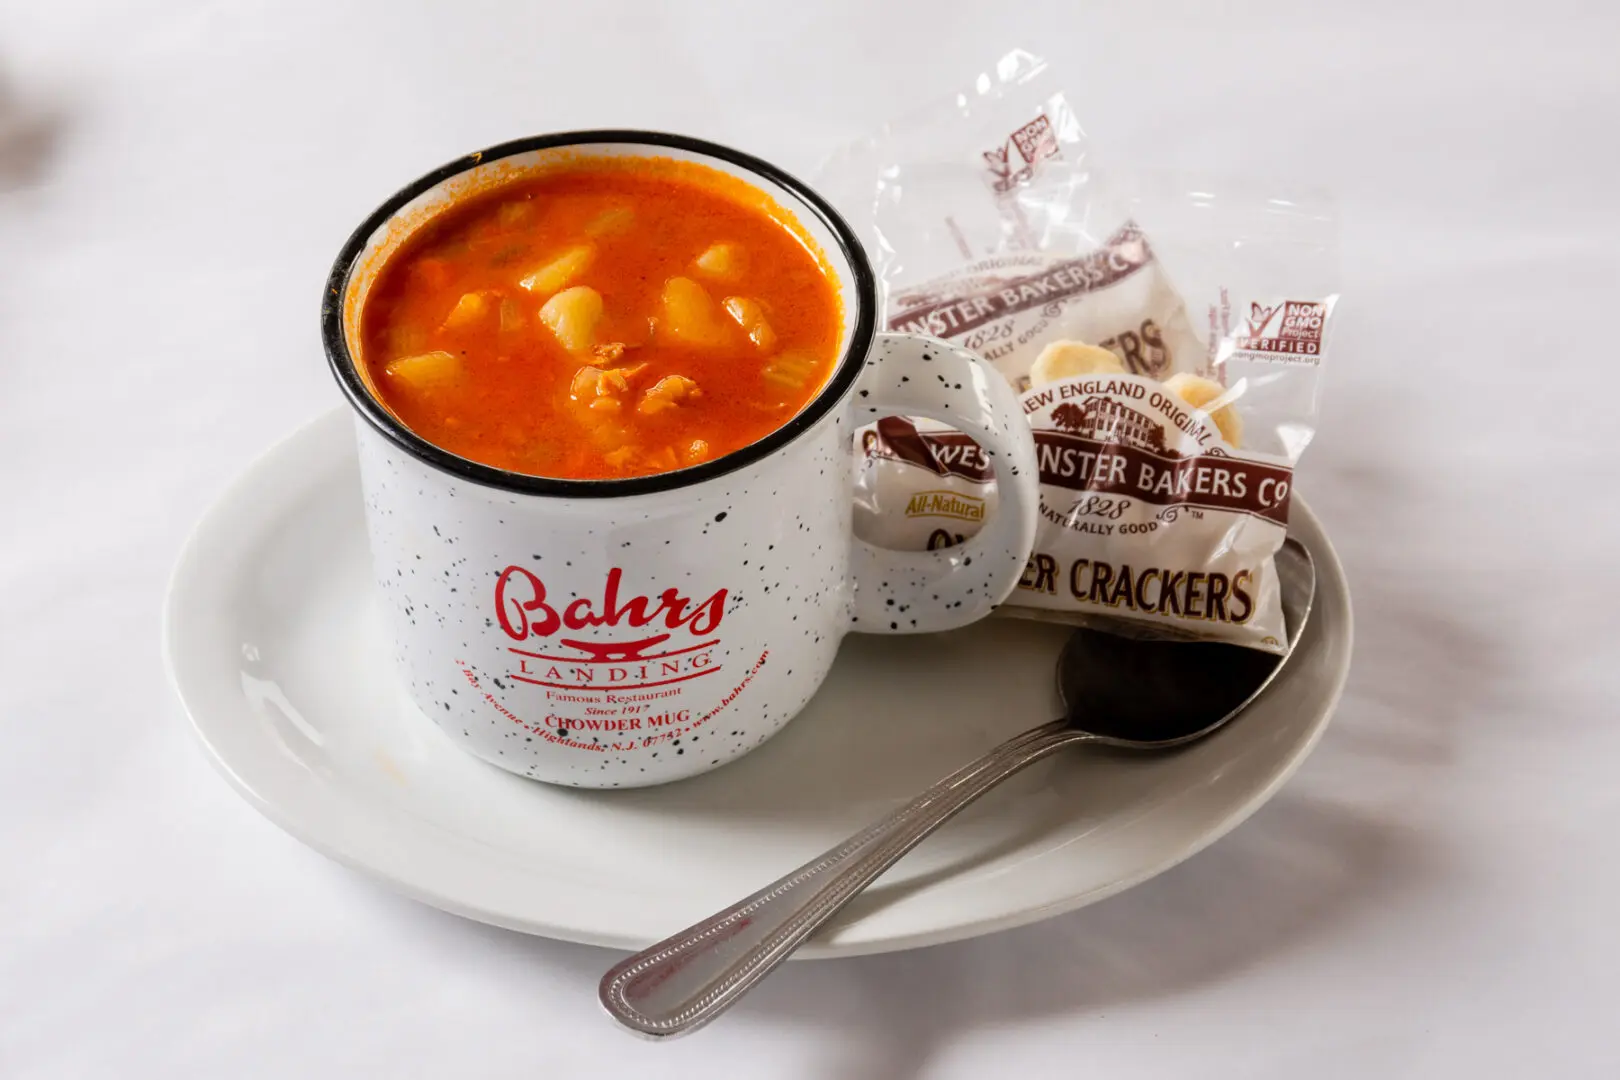 A bowl of soup and crackers on a plate.